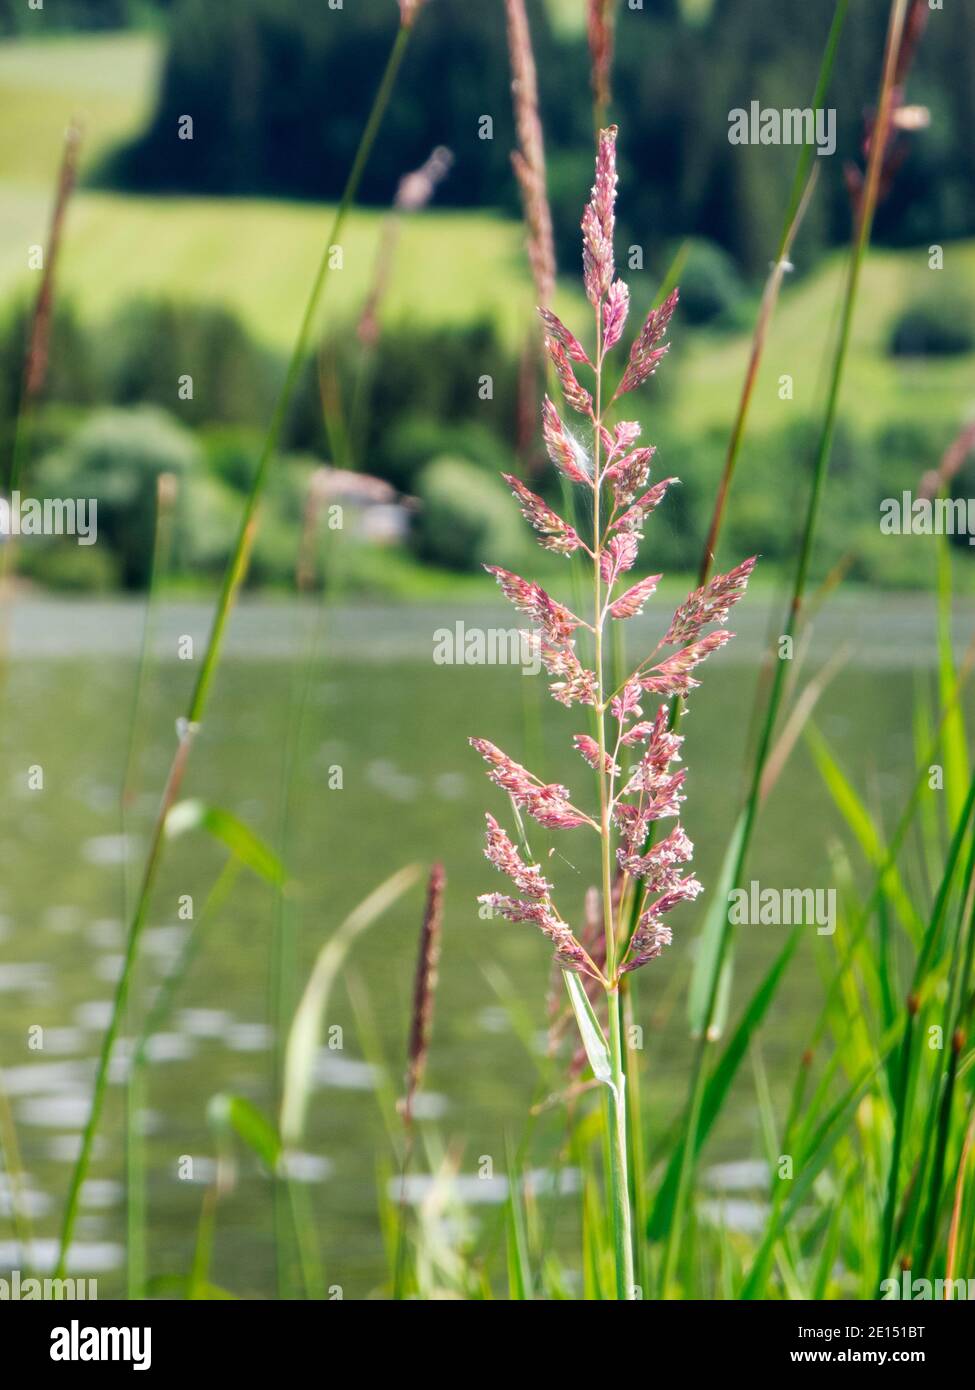 Close-up of a panicle of cane grass (lat: Phalaris arundinacea) on the bank of a small lake in Bavaria / Germany in summer 2020. Stock Photo